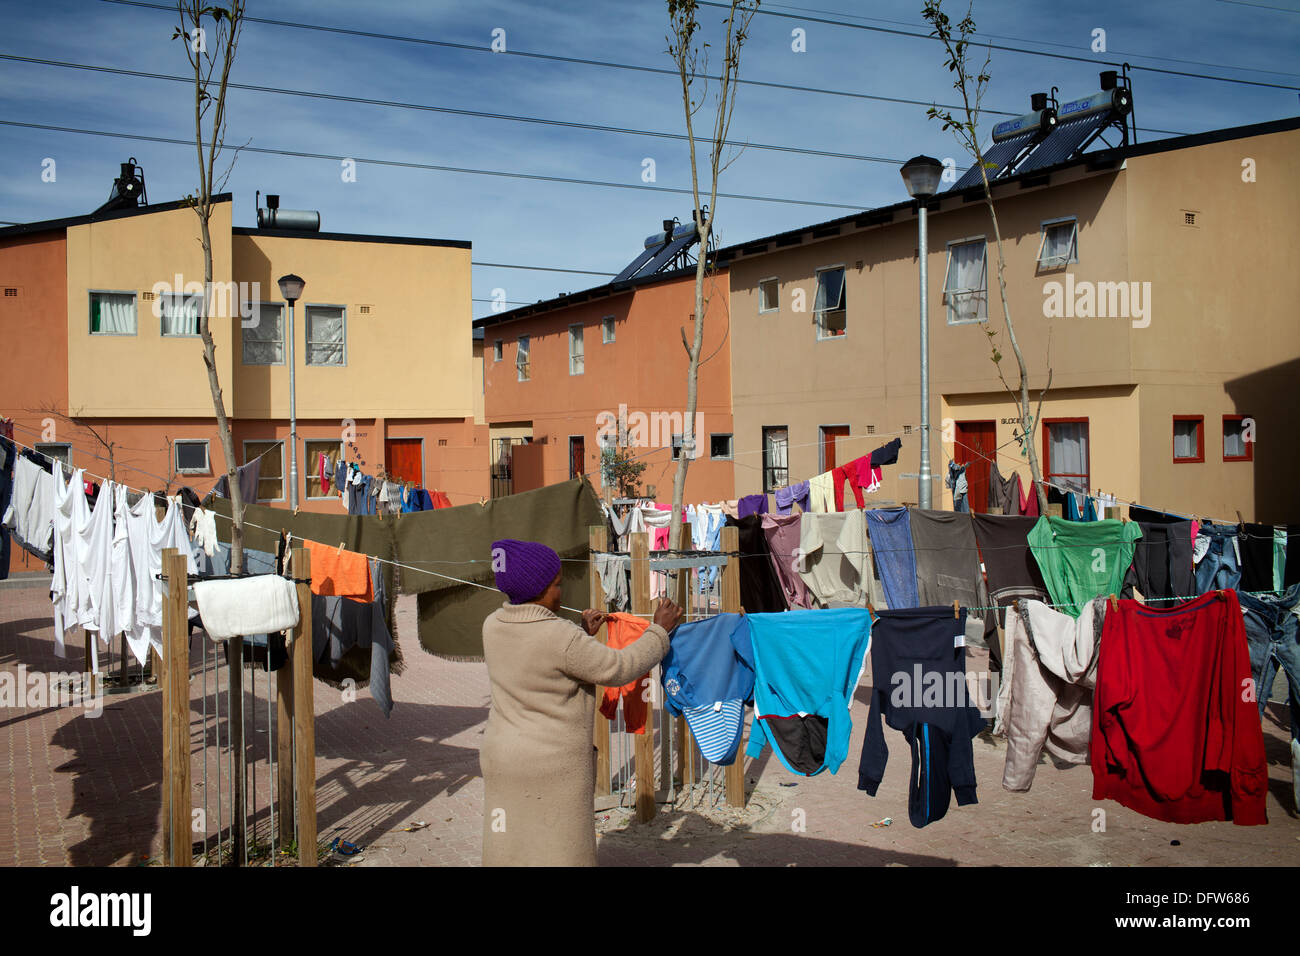 Cape Town South Africa - A woman hangs up her washing in a newly developed RDP housing project in langa where all houses are Stock Photo